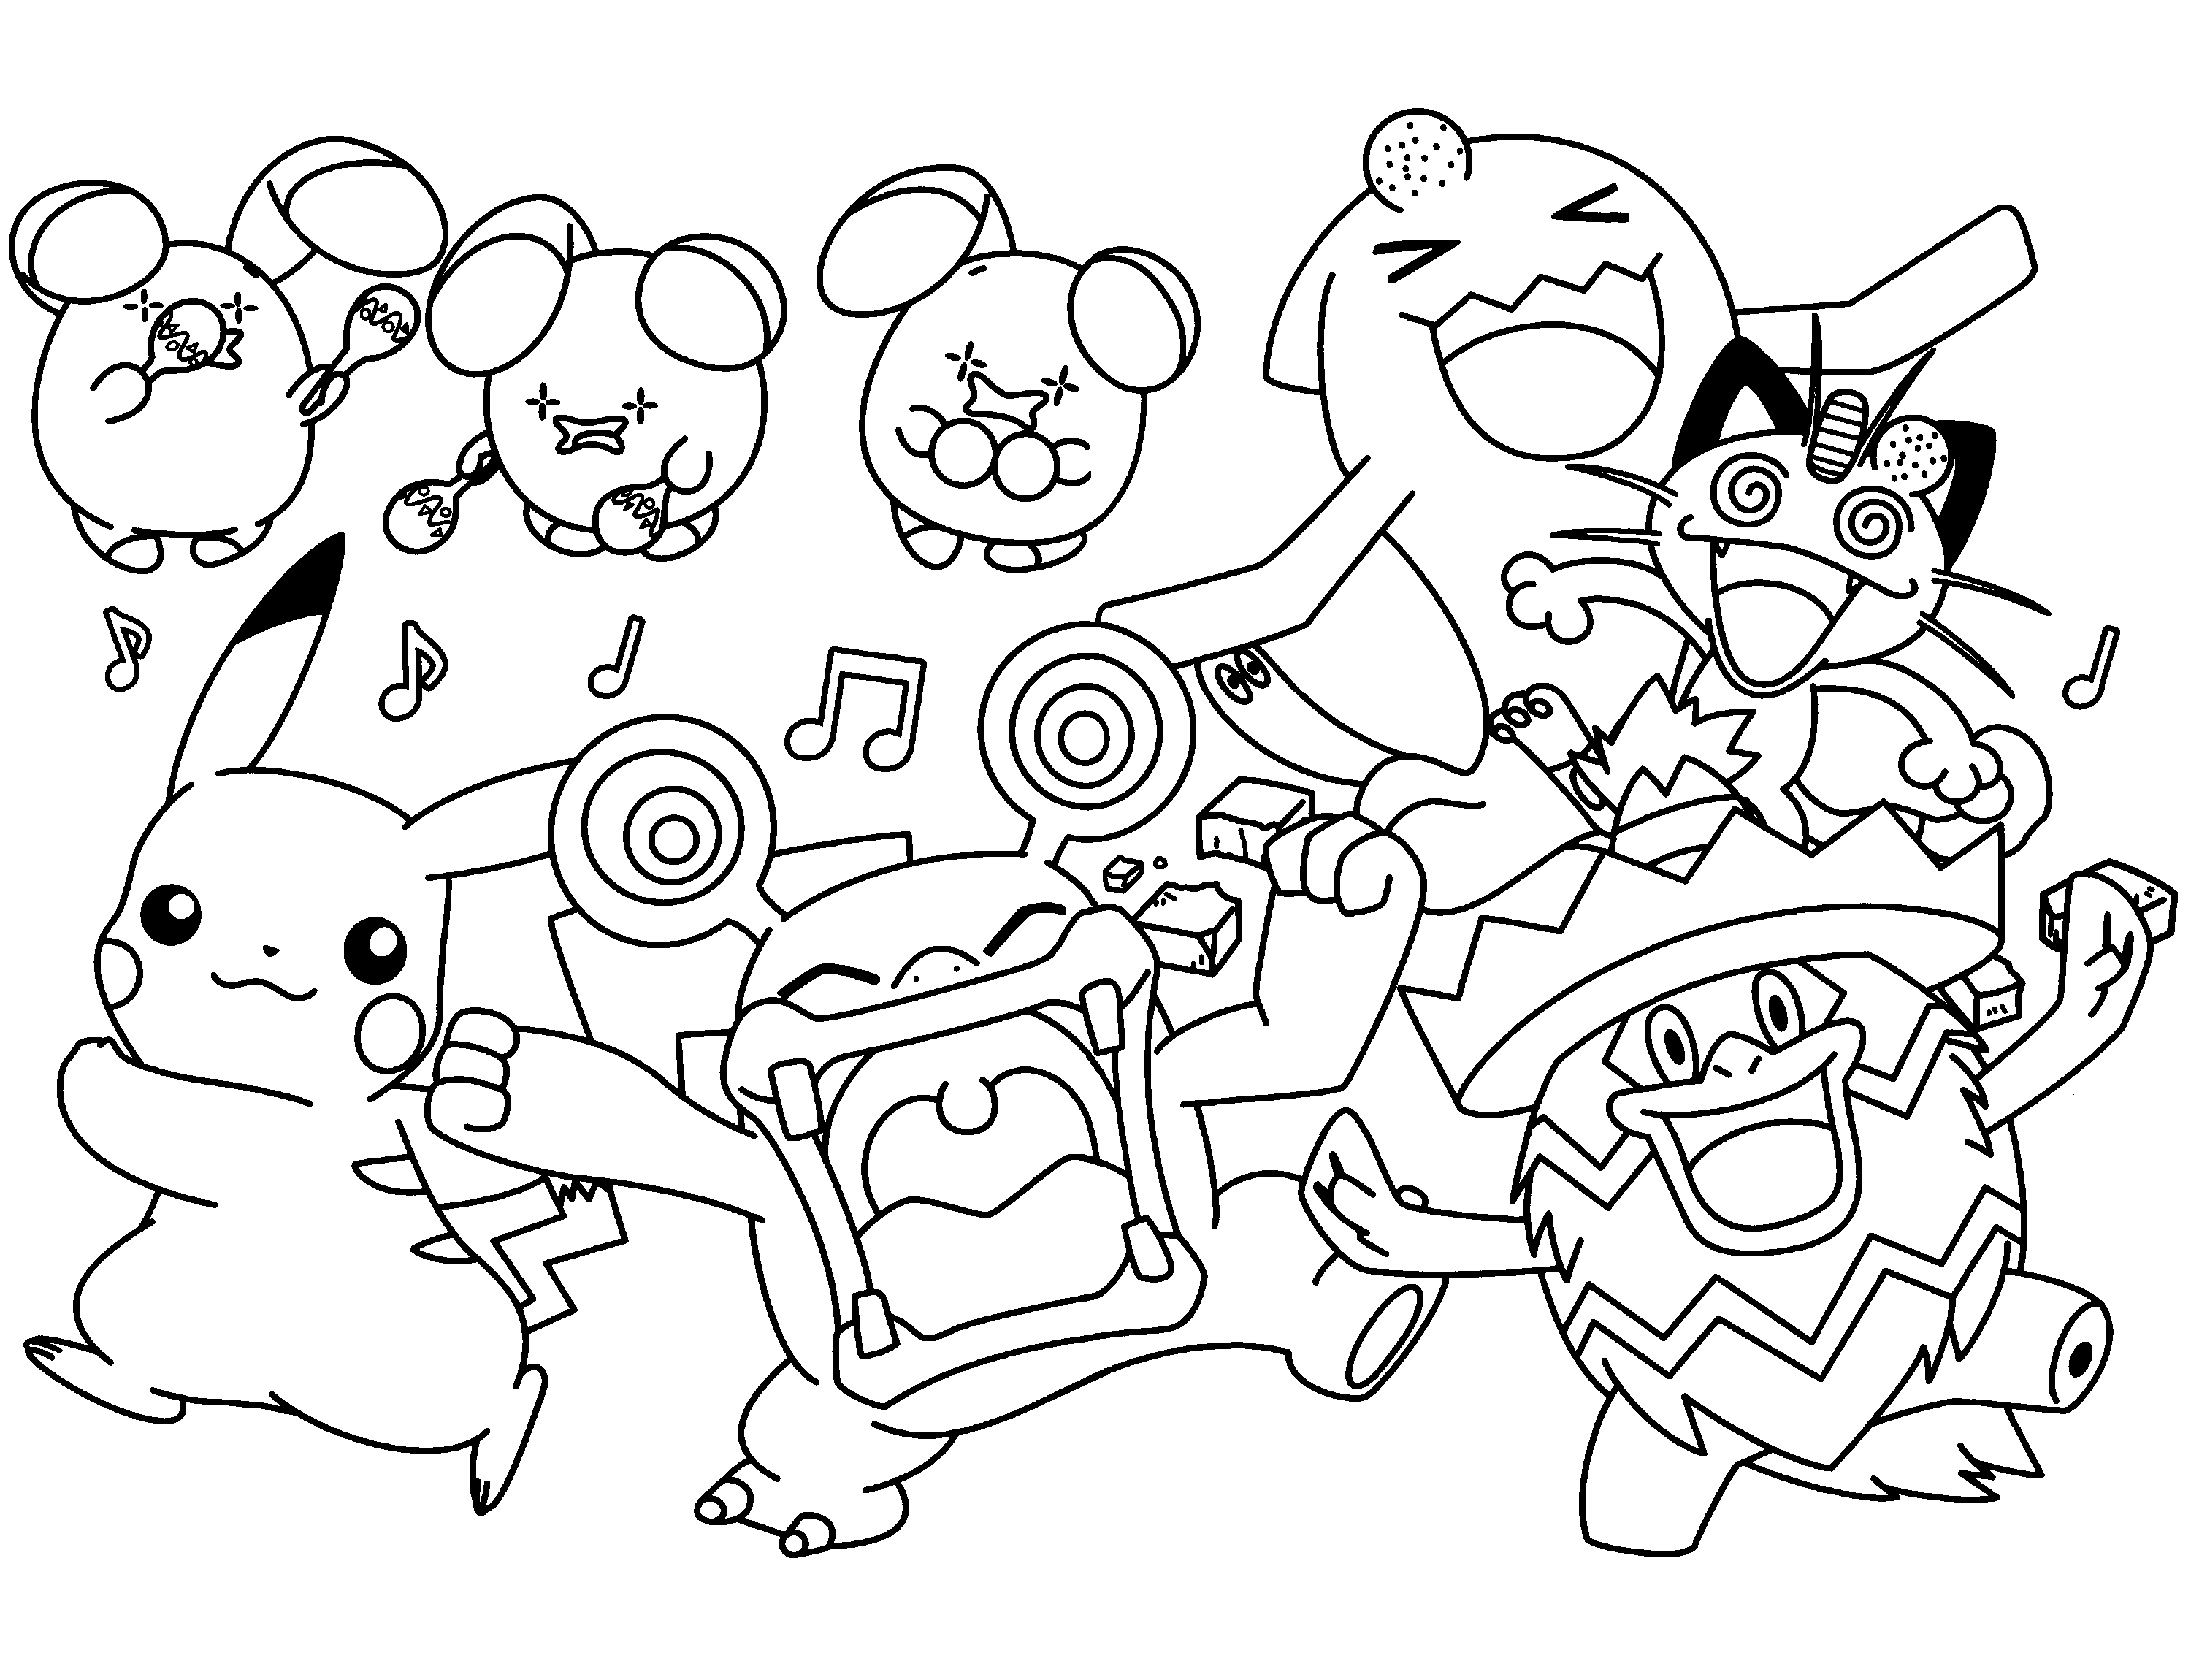 Pokemon Group Coloring Pages - Coloring Home